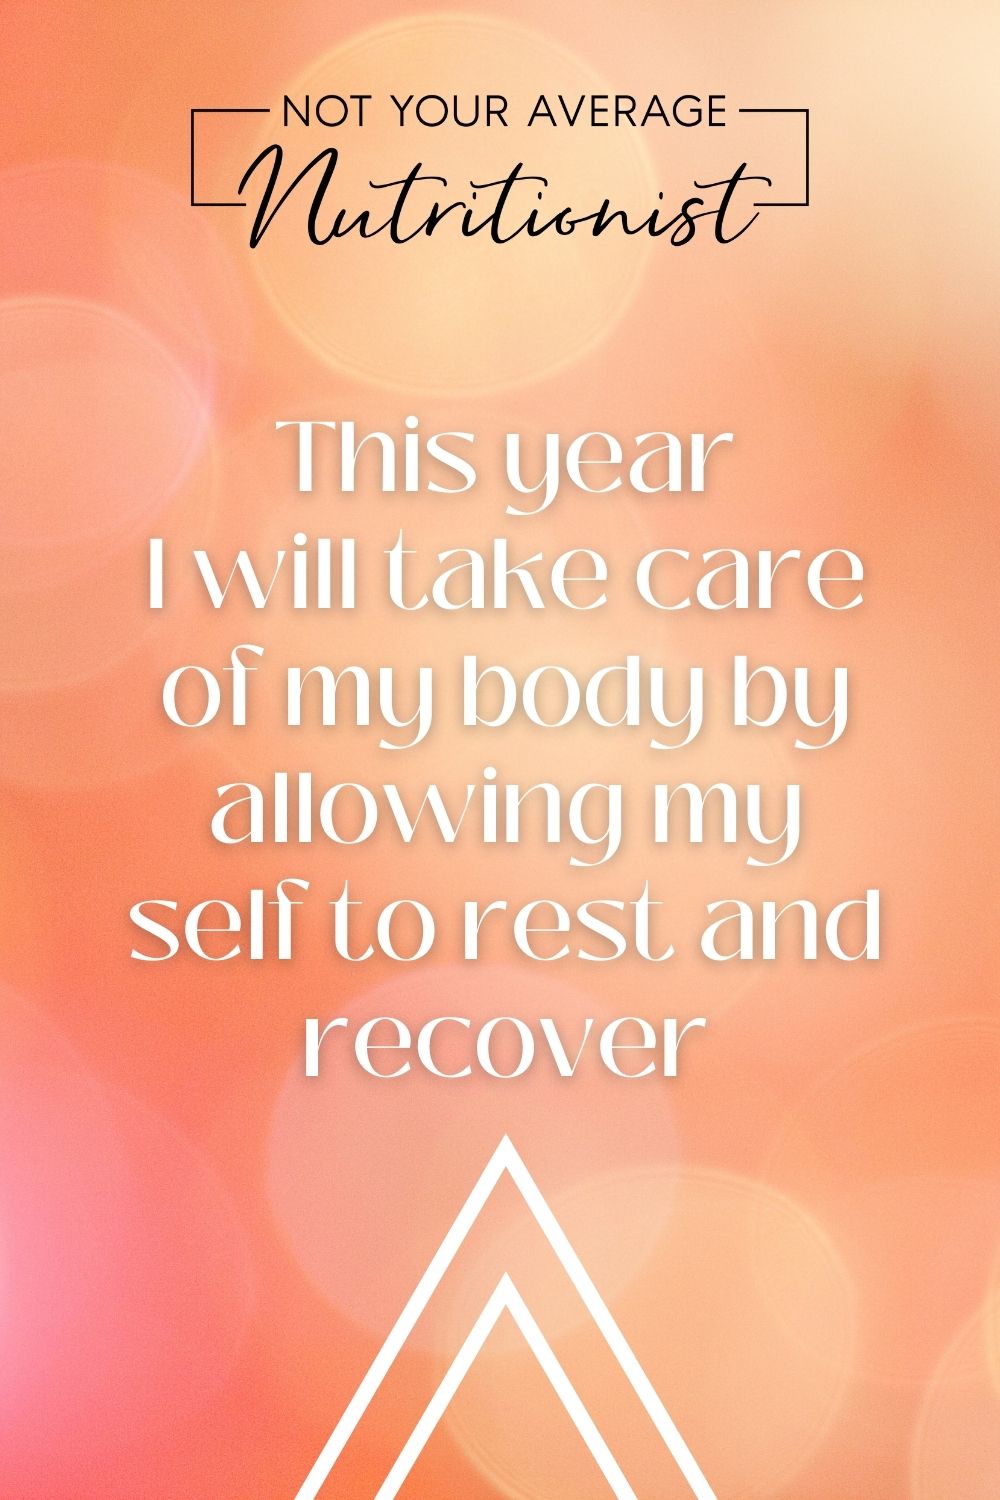 This year I will take care of my body by allowing my self to rest and recover